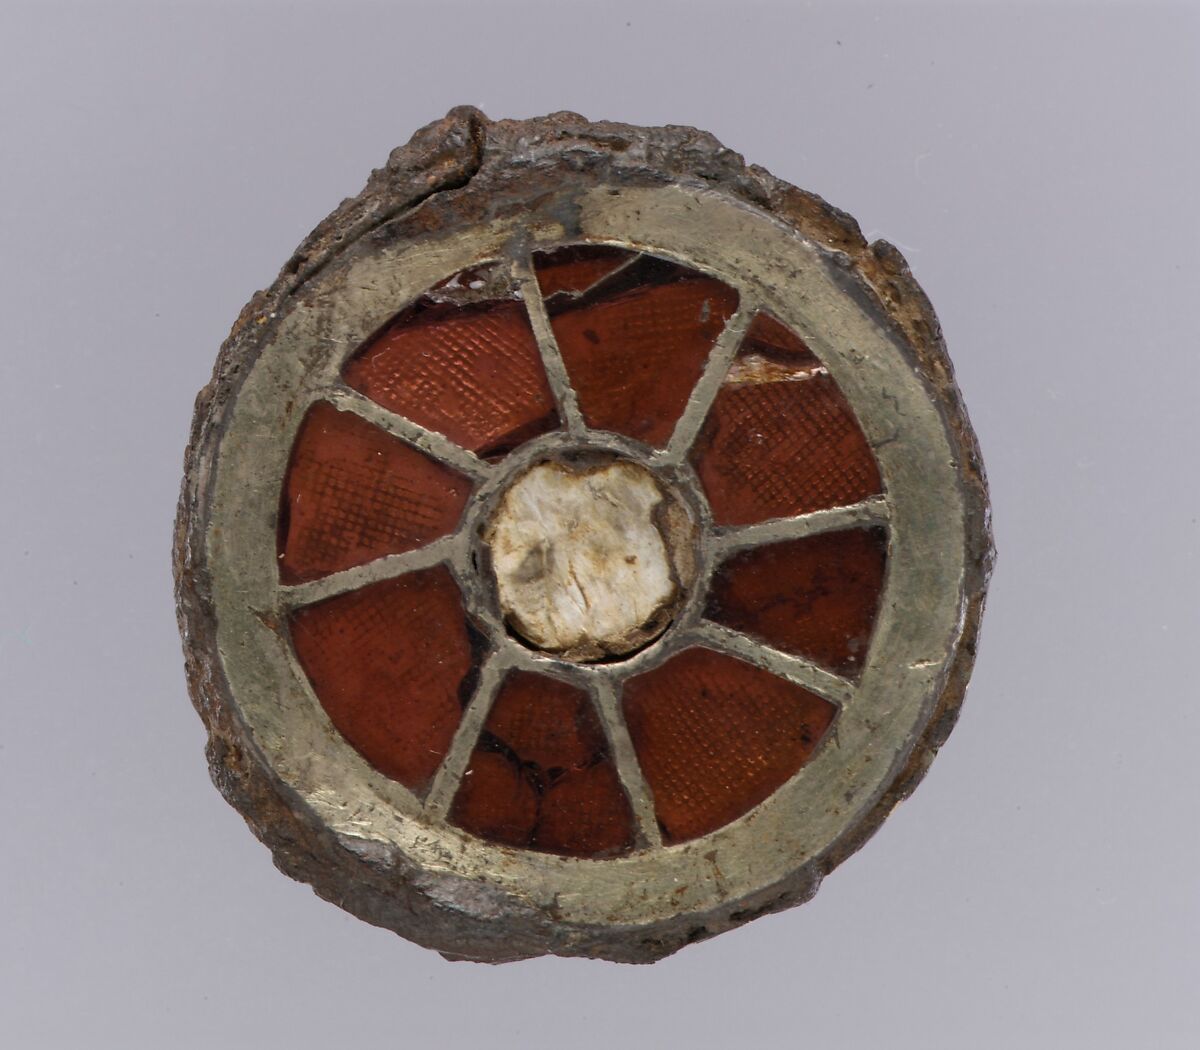 Disk Brooch, Silver-gilt on iron core, garnet, mother of pearl, Frankish 